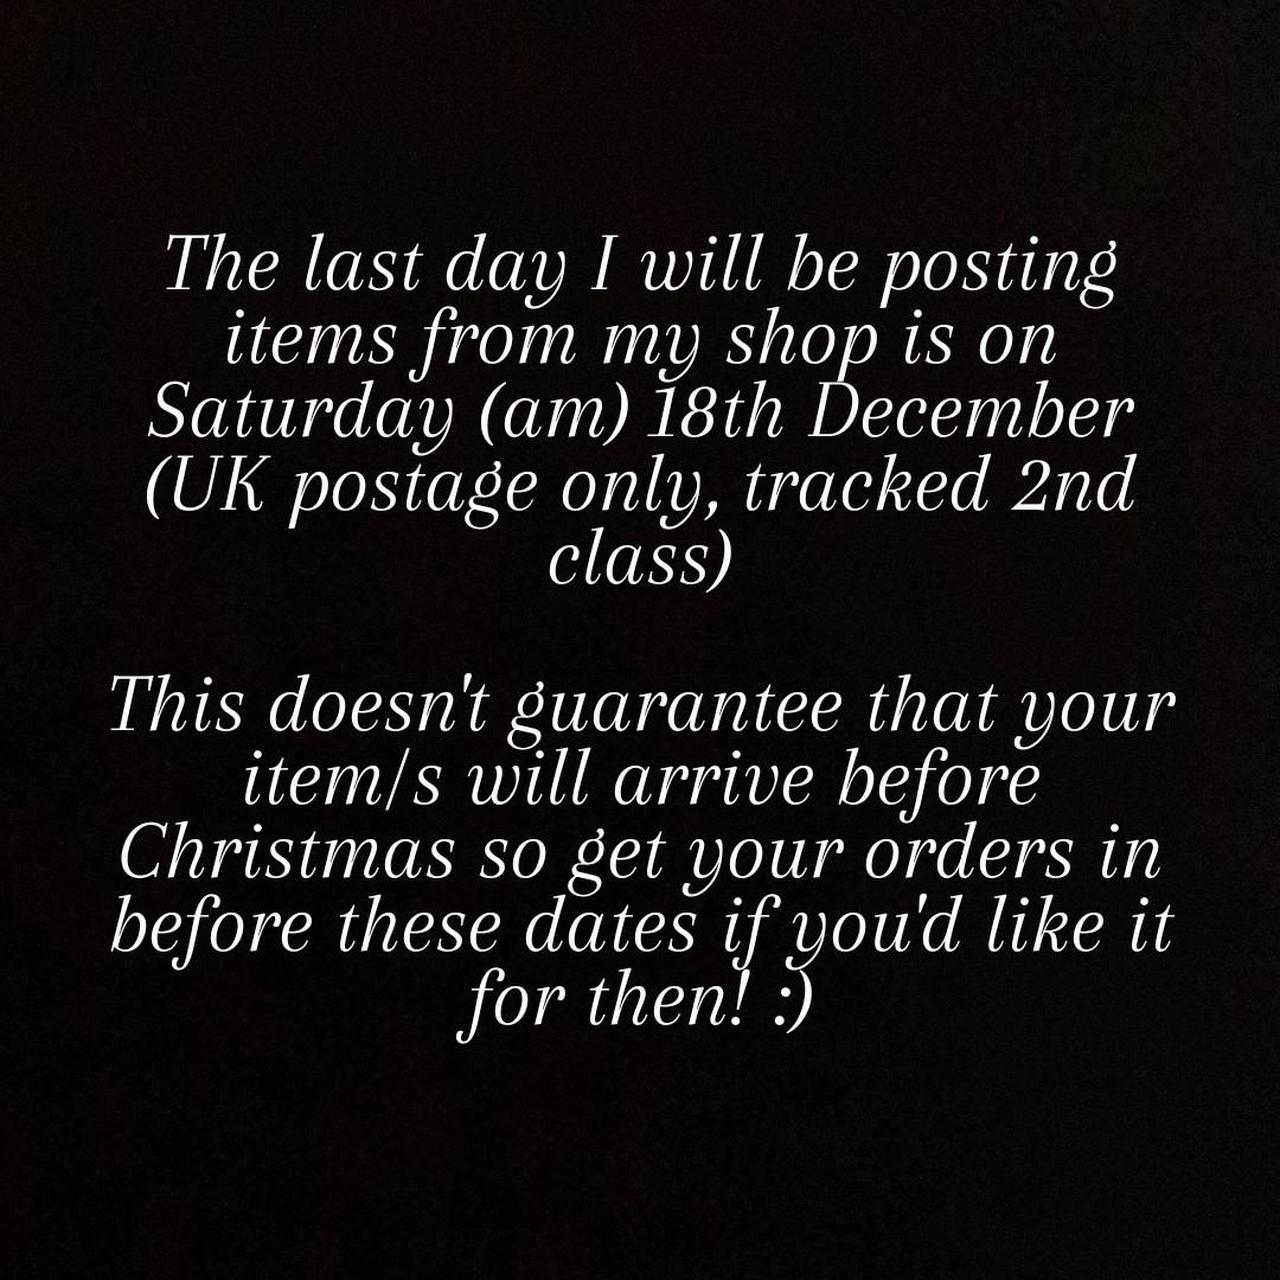 Product Image 4 - Last Christmas postage dates (posted